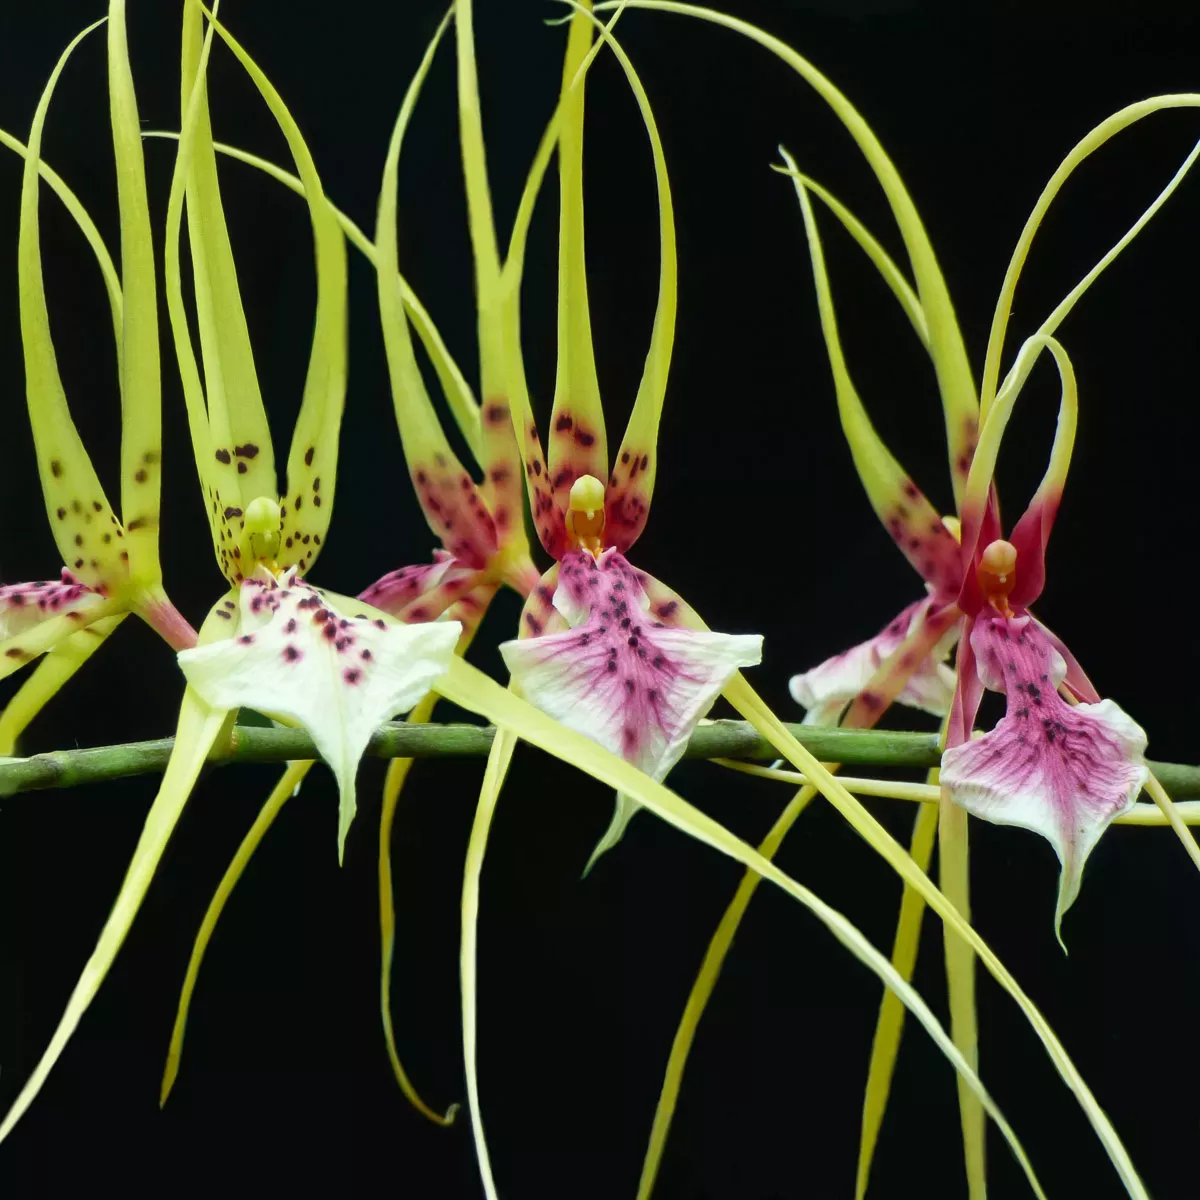 A collection of green white and purple orchids with long thin filament like petals